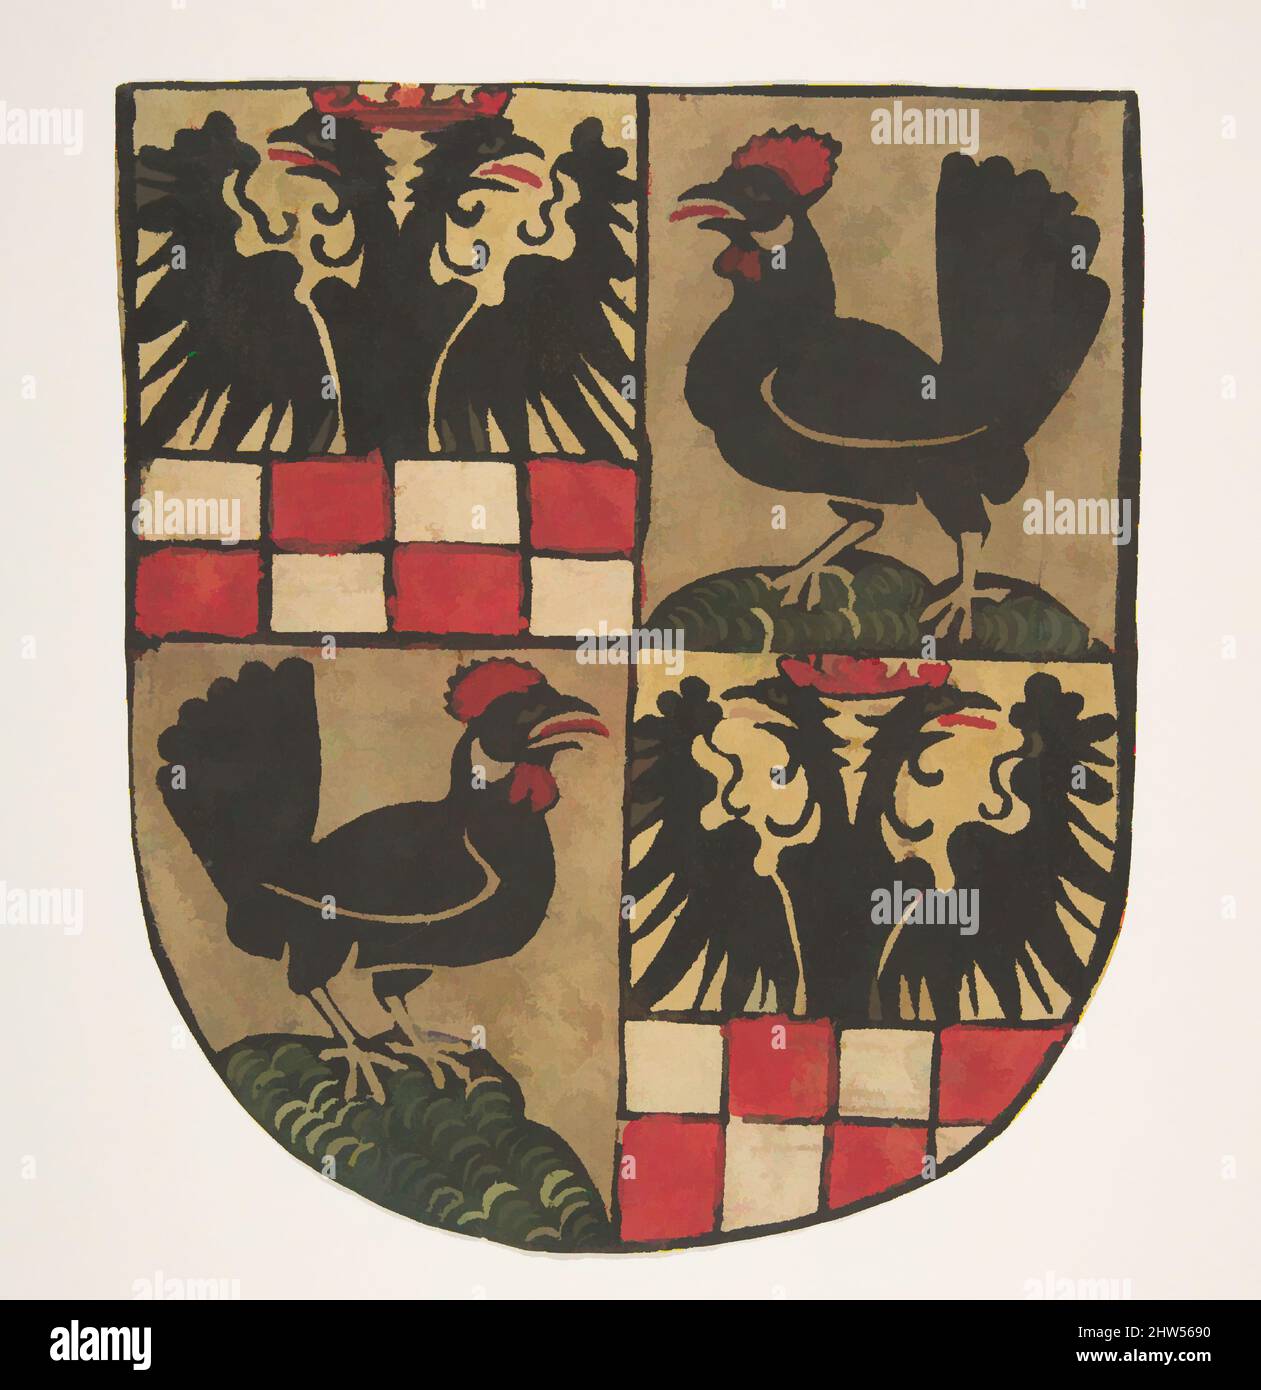 Art inspired by Arms of the Counts of Botenlauben, 1480–1500, Woodcut, colored by stencil, 7-5/16 x 6-5/16 in., Prints, Anonymous, German, Thuringia, 15th century, Classic works modernized by Artotop with a splash of modernity. Shapes, color and value, eye-catching visual impact on art. Emotions through freedom of artworks in a contemporary way. A timeless message pursuing a wildly creative new direction. Artists turning to the digital medium and creating the Artotop NFT Stock Photo